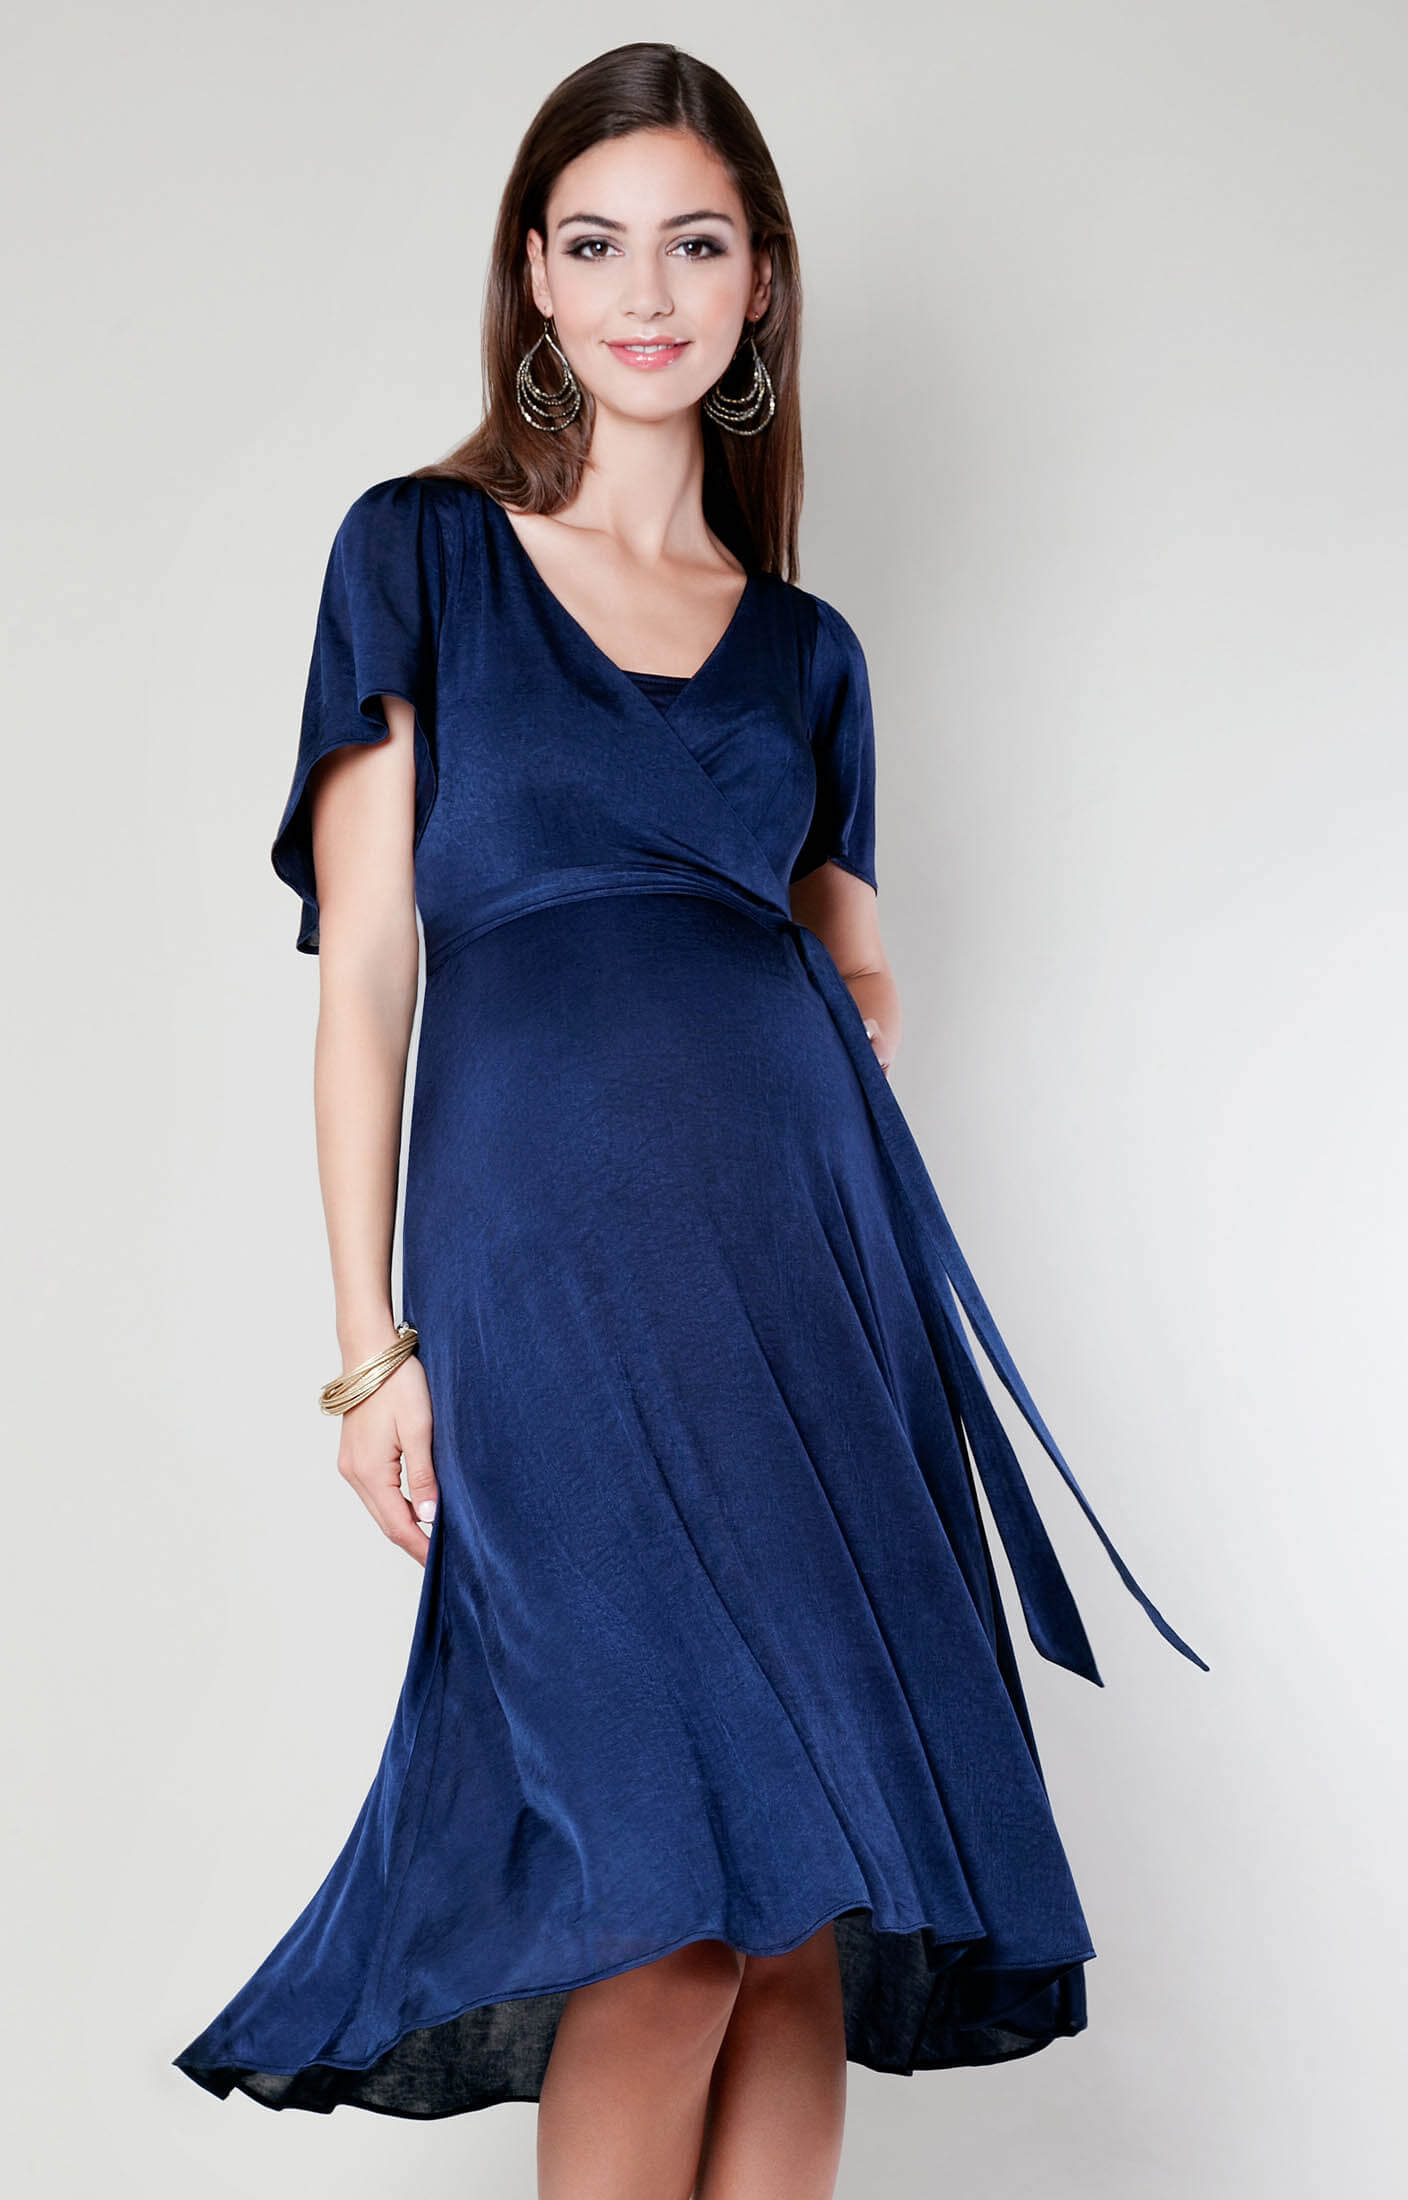 bridesmaid dresses for breastfeeding mothers